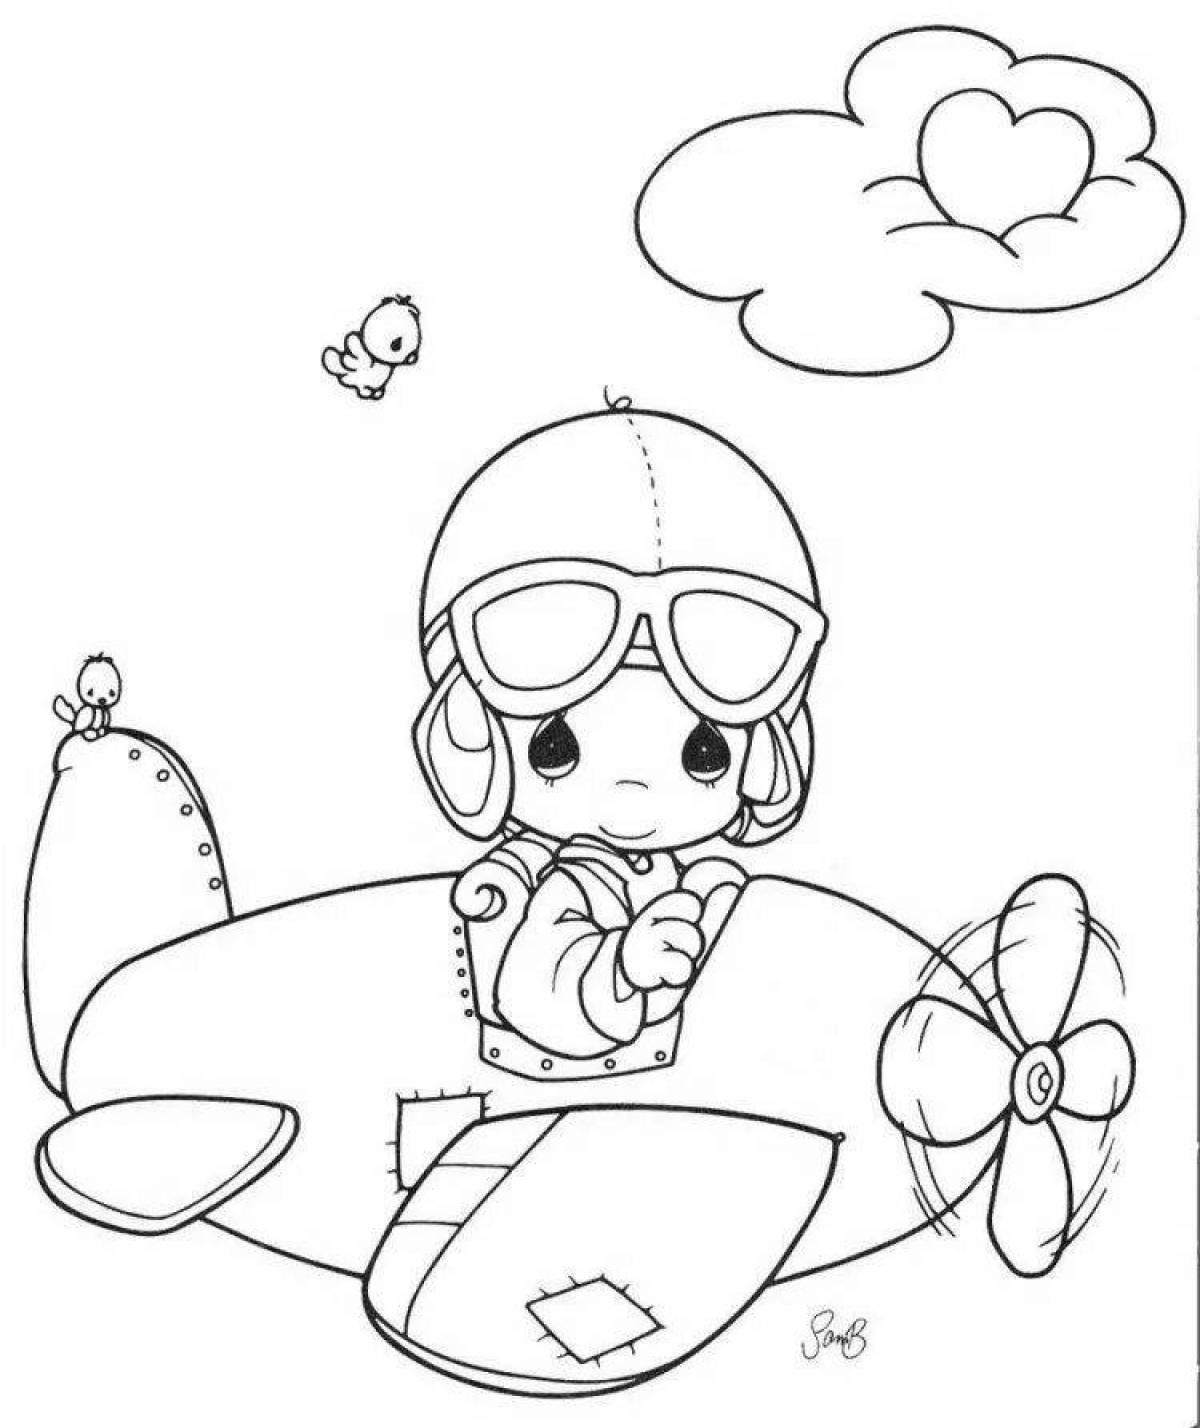 Cute Pilot Coloring Page for Toddlers